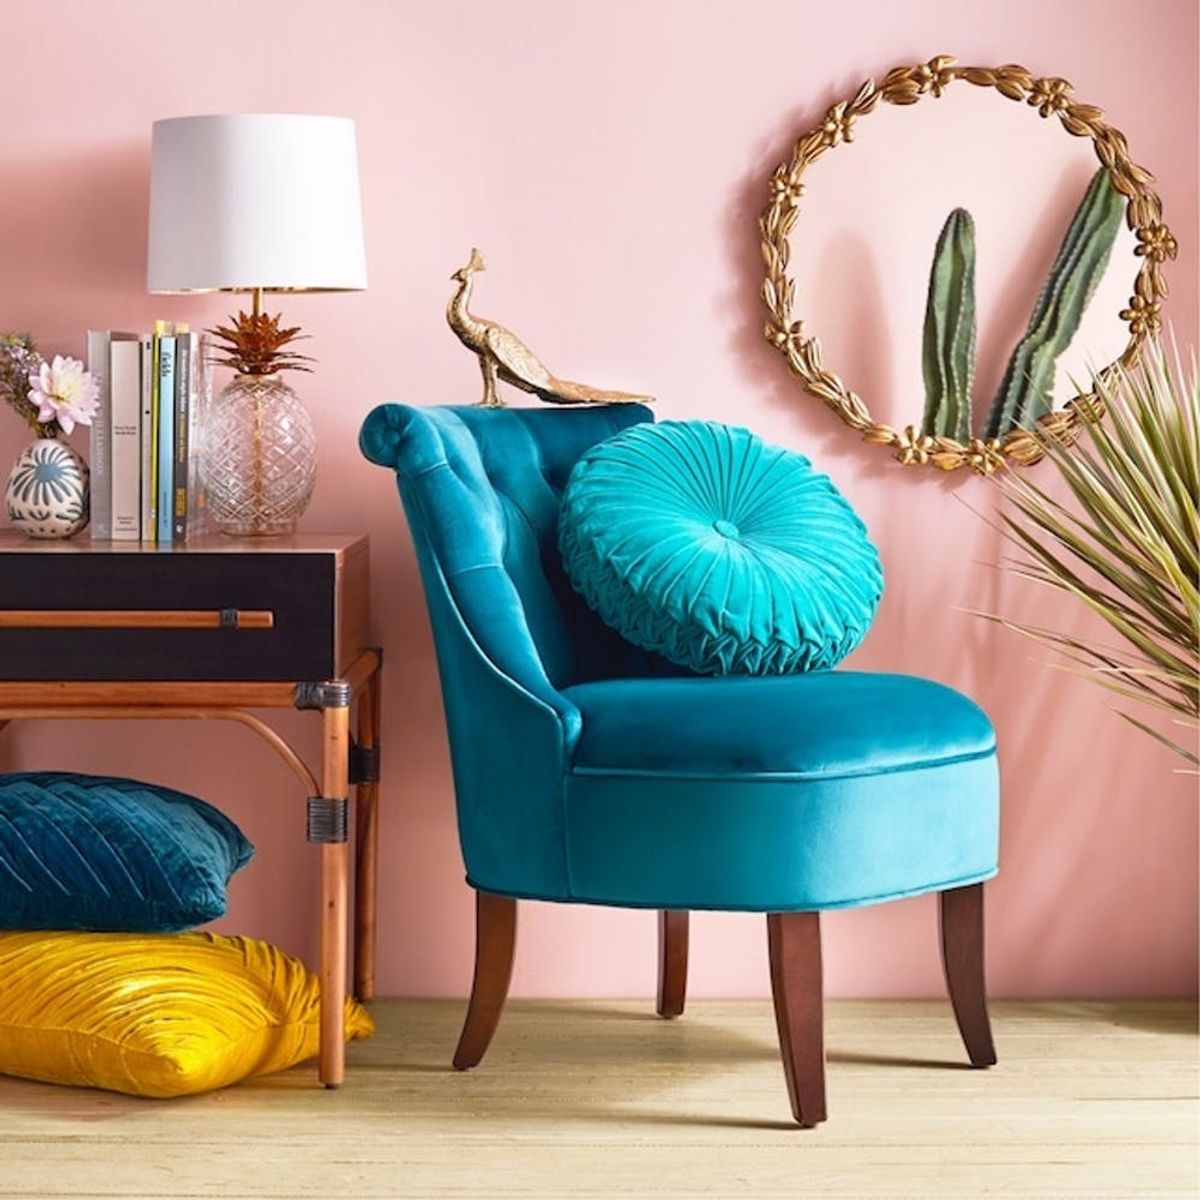 Emily Henderson’s Top Picks from Target’s Stunning New Opalhouse Collection